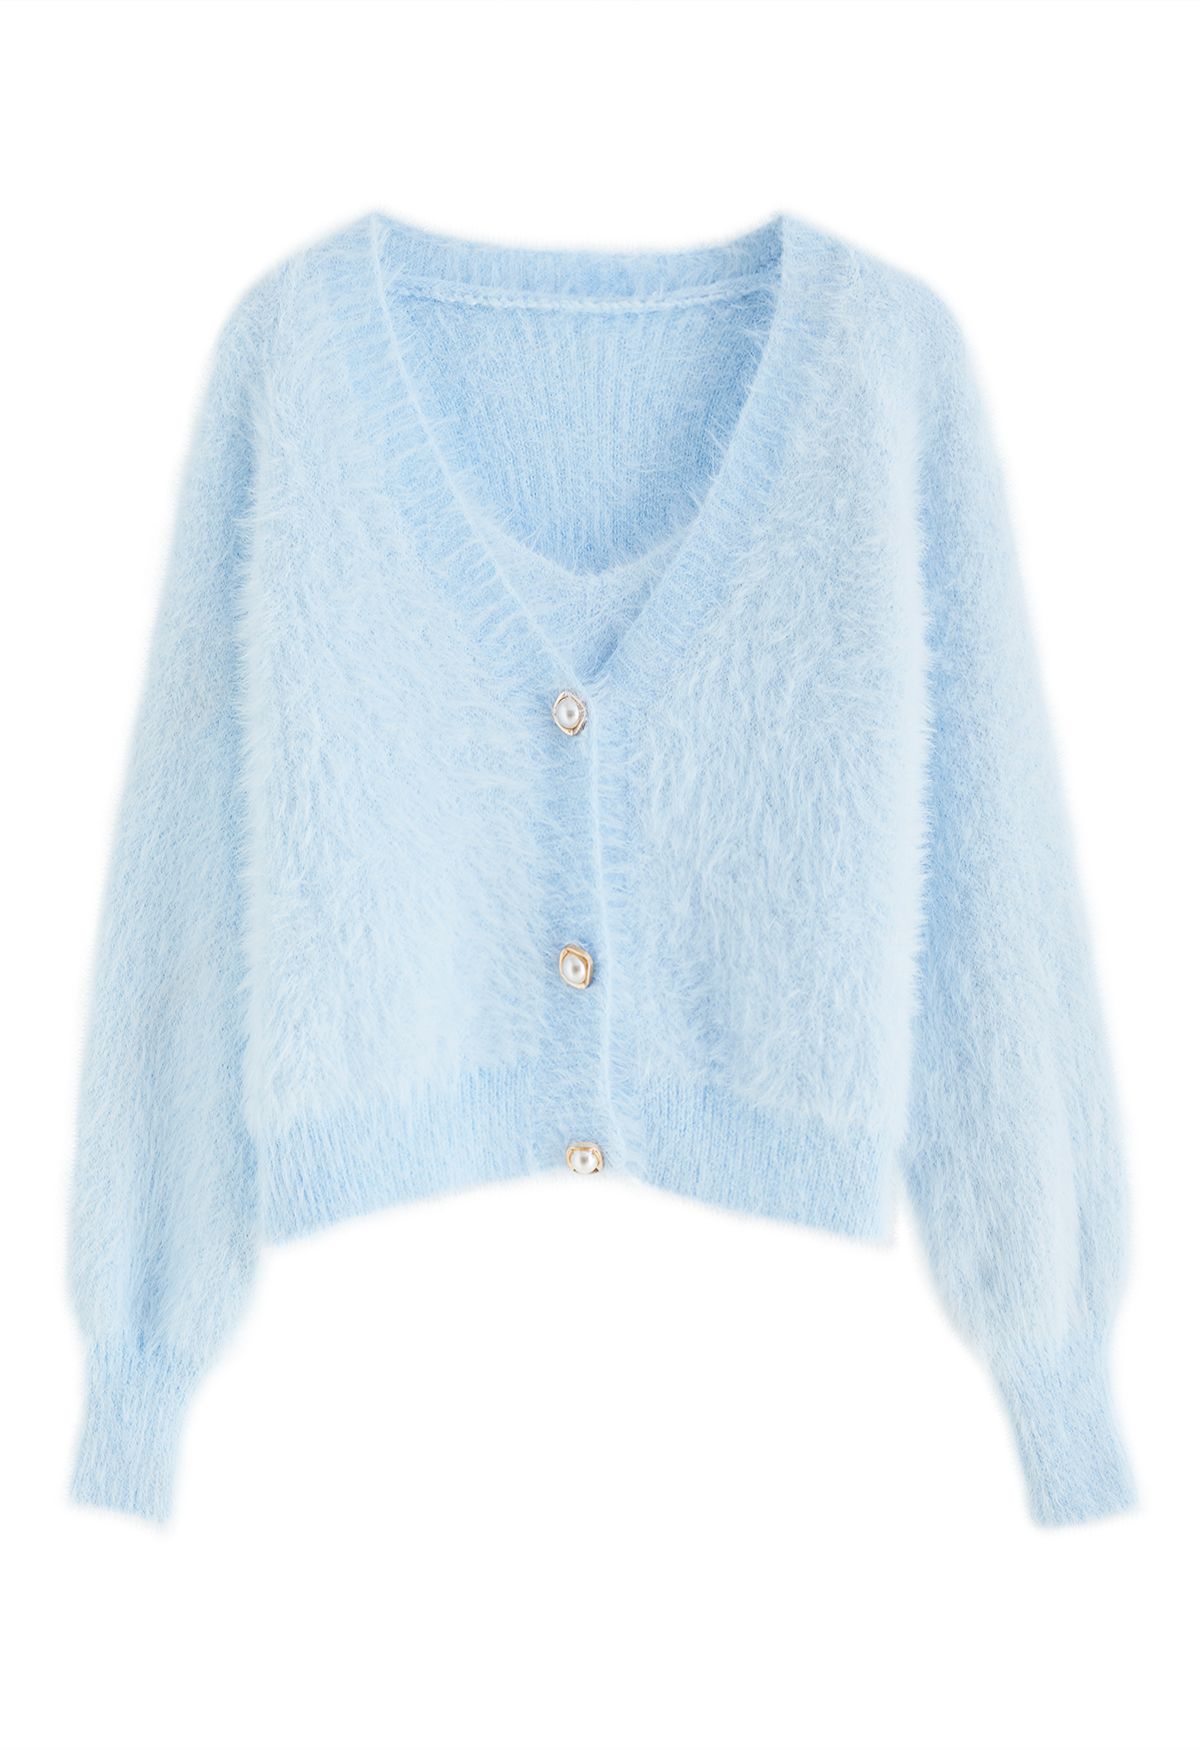 Fuzzy Cami Top and Pearly Buttoned Cardigan Set in Baby Blue - Retro ...